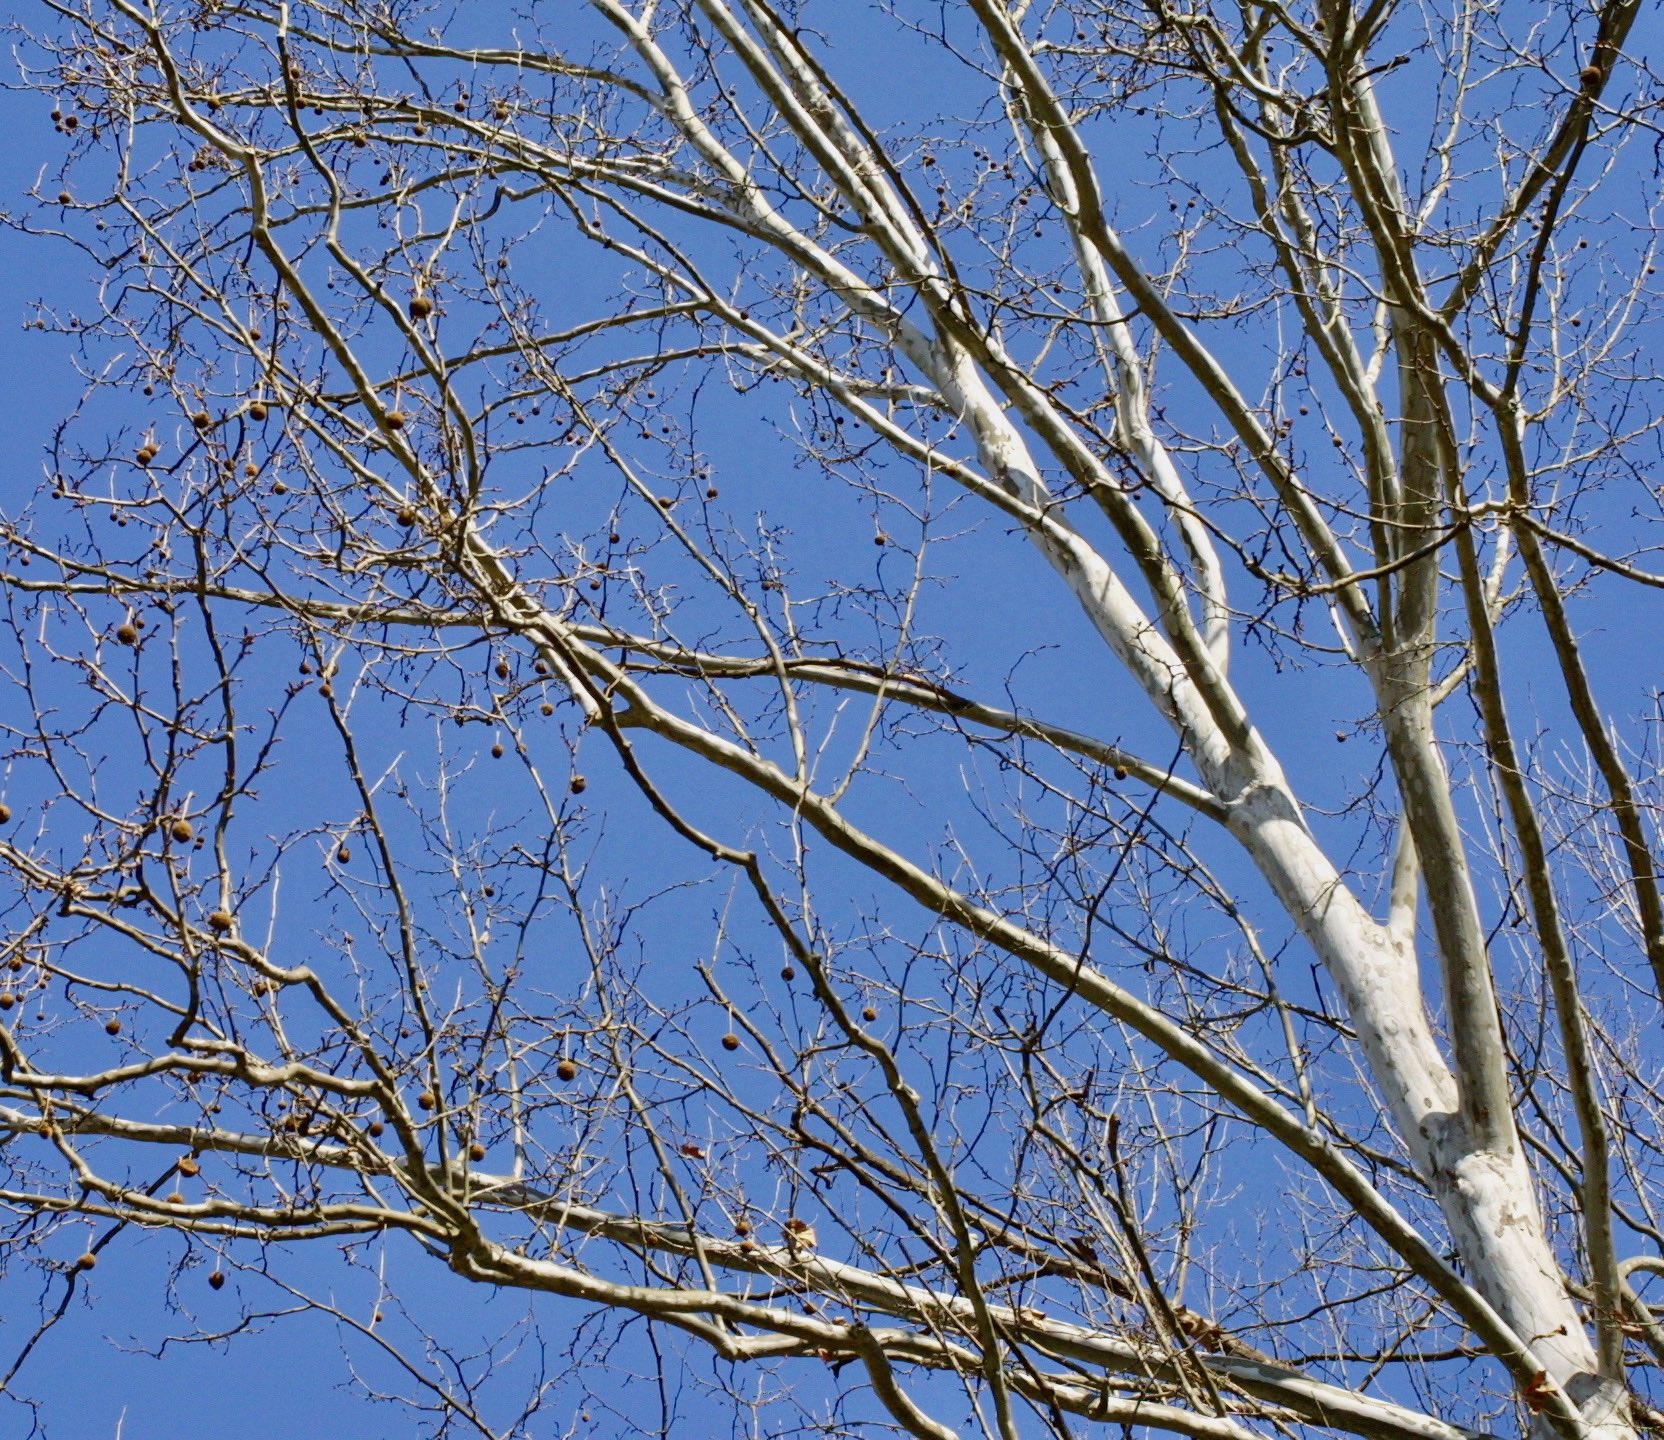 The Scientific Name is Platanus occidentalis. You will likely hear them called American Sycamore. This picture shows the White upper trunk, with brown fruits on long stalks of Platanus occidentalis